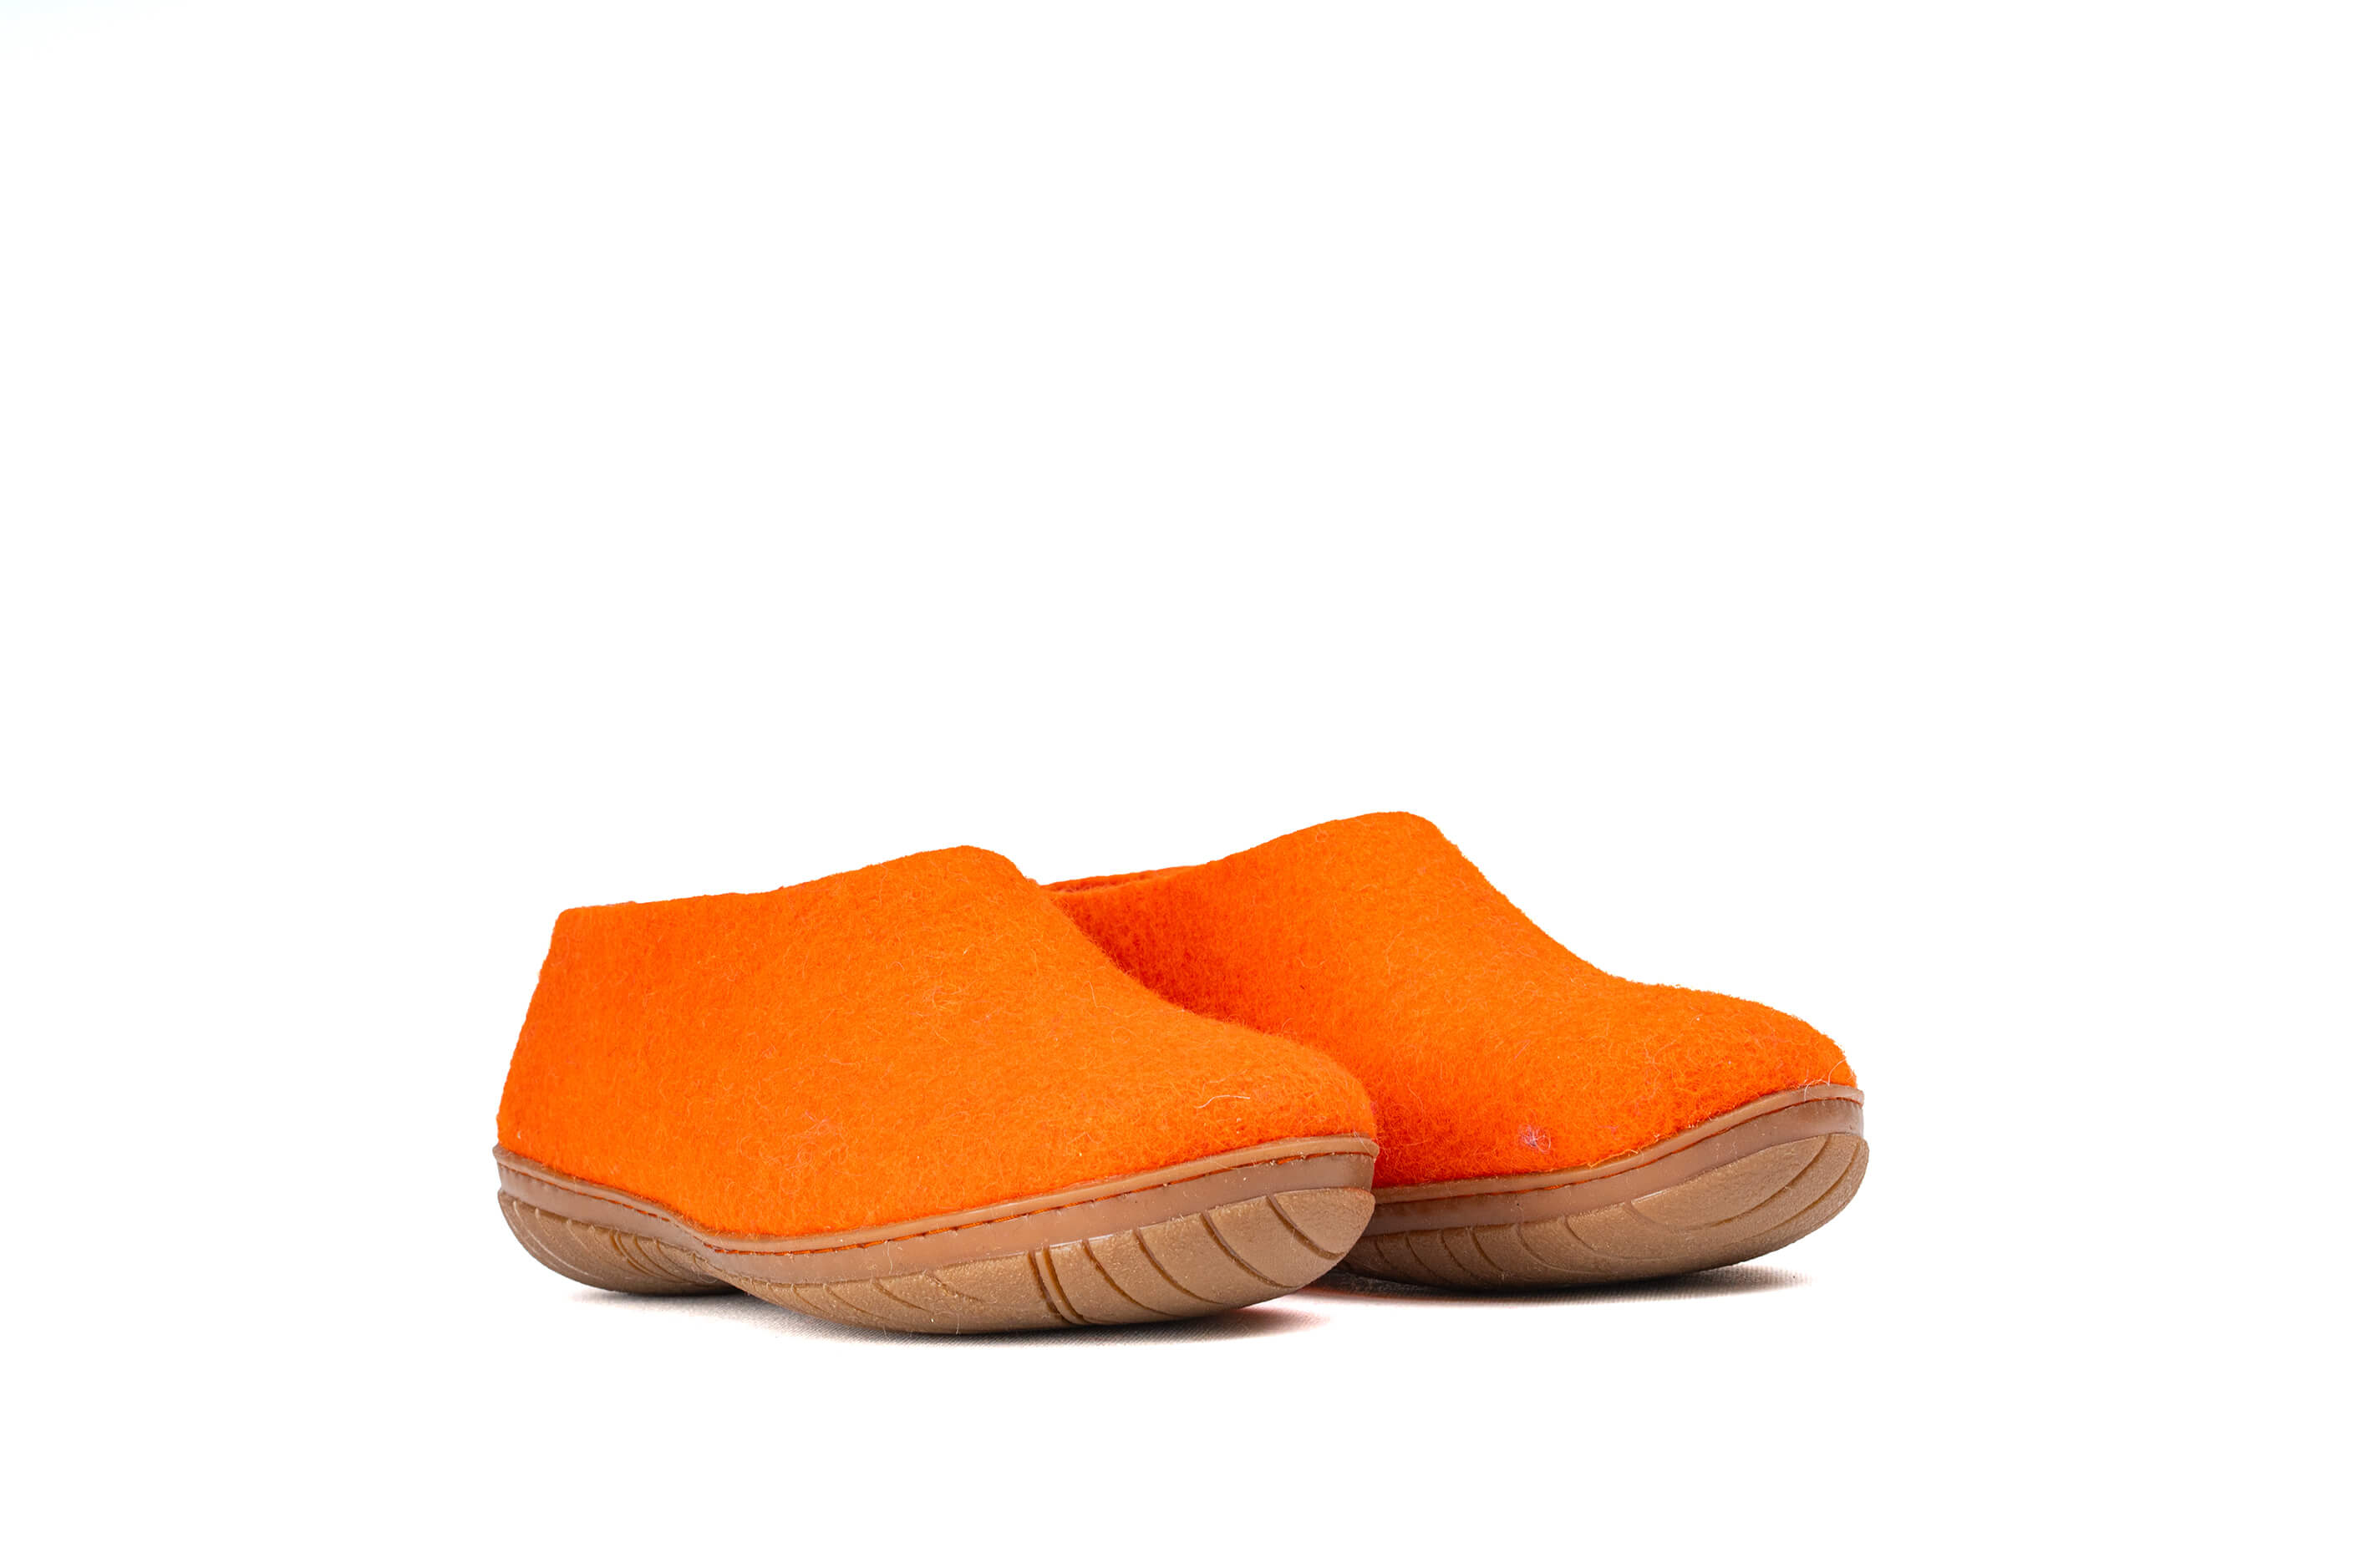 Outdoor Shoes With Rubber Sole - Orange